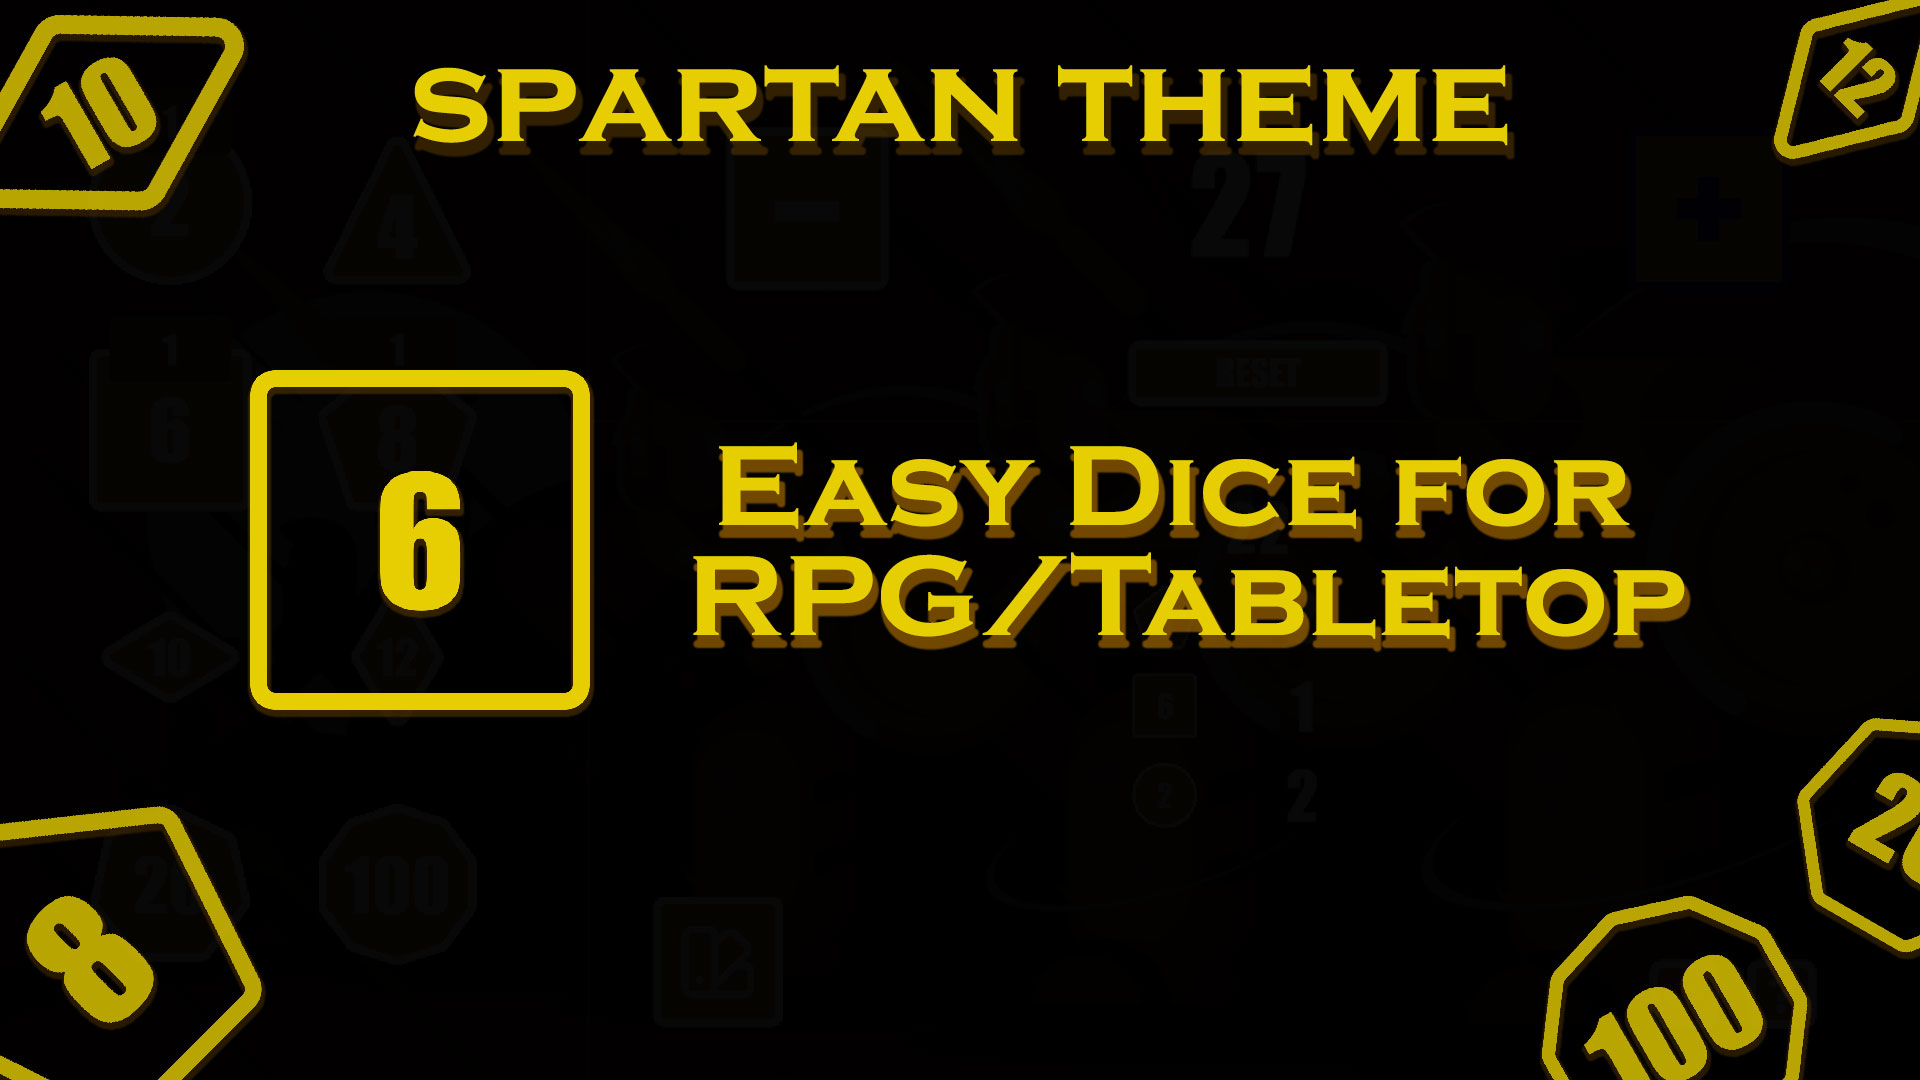 Easy Dice for RPG/Tabletop - Spartan Theme